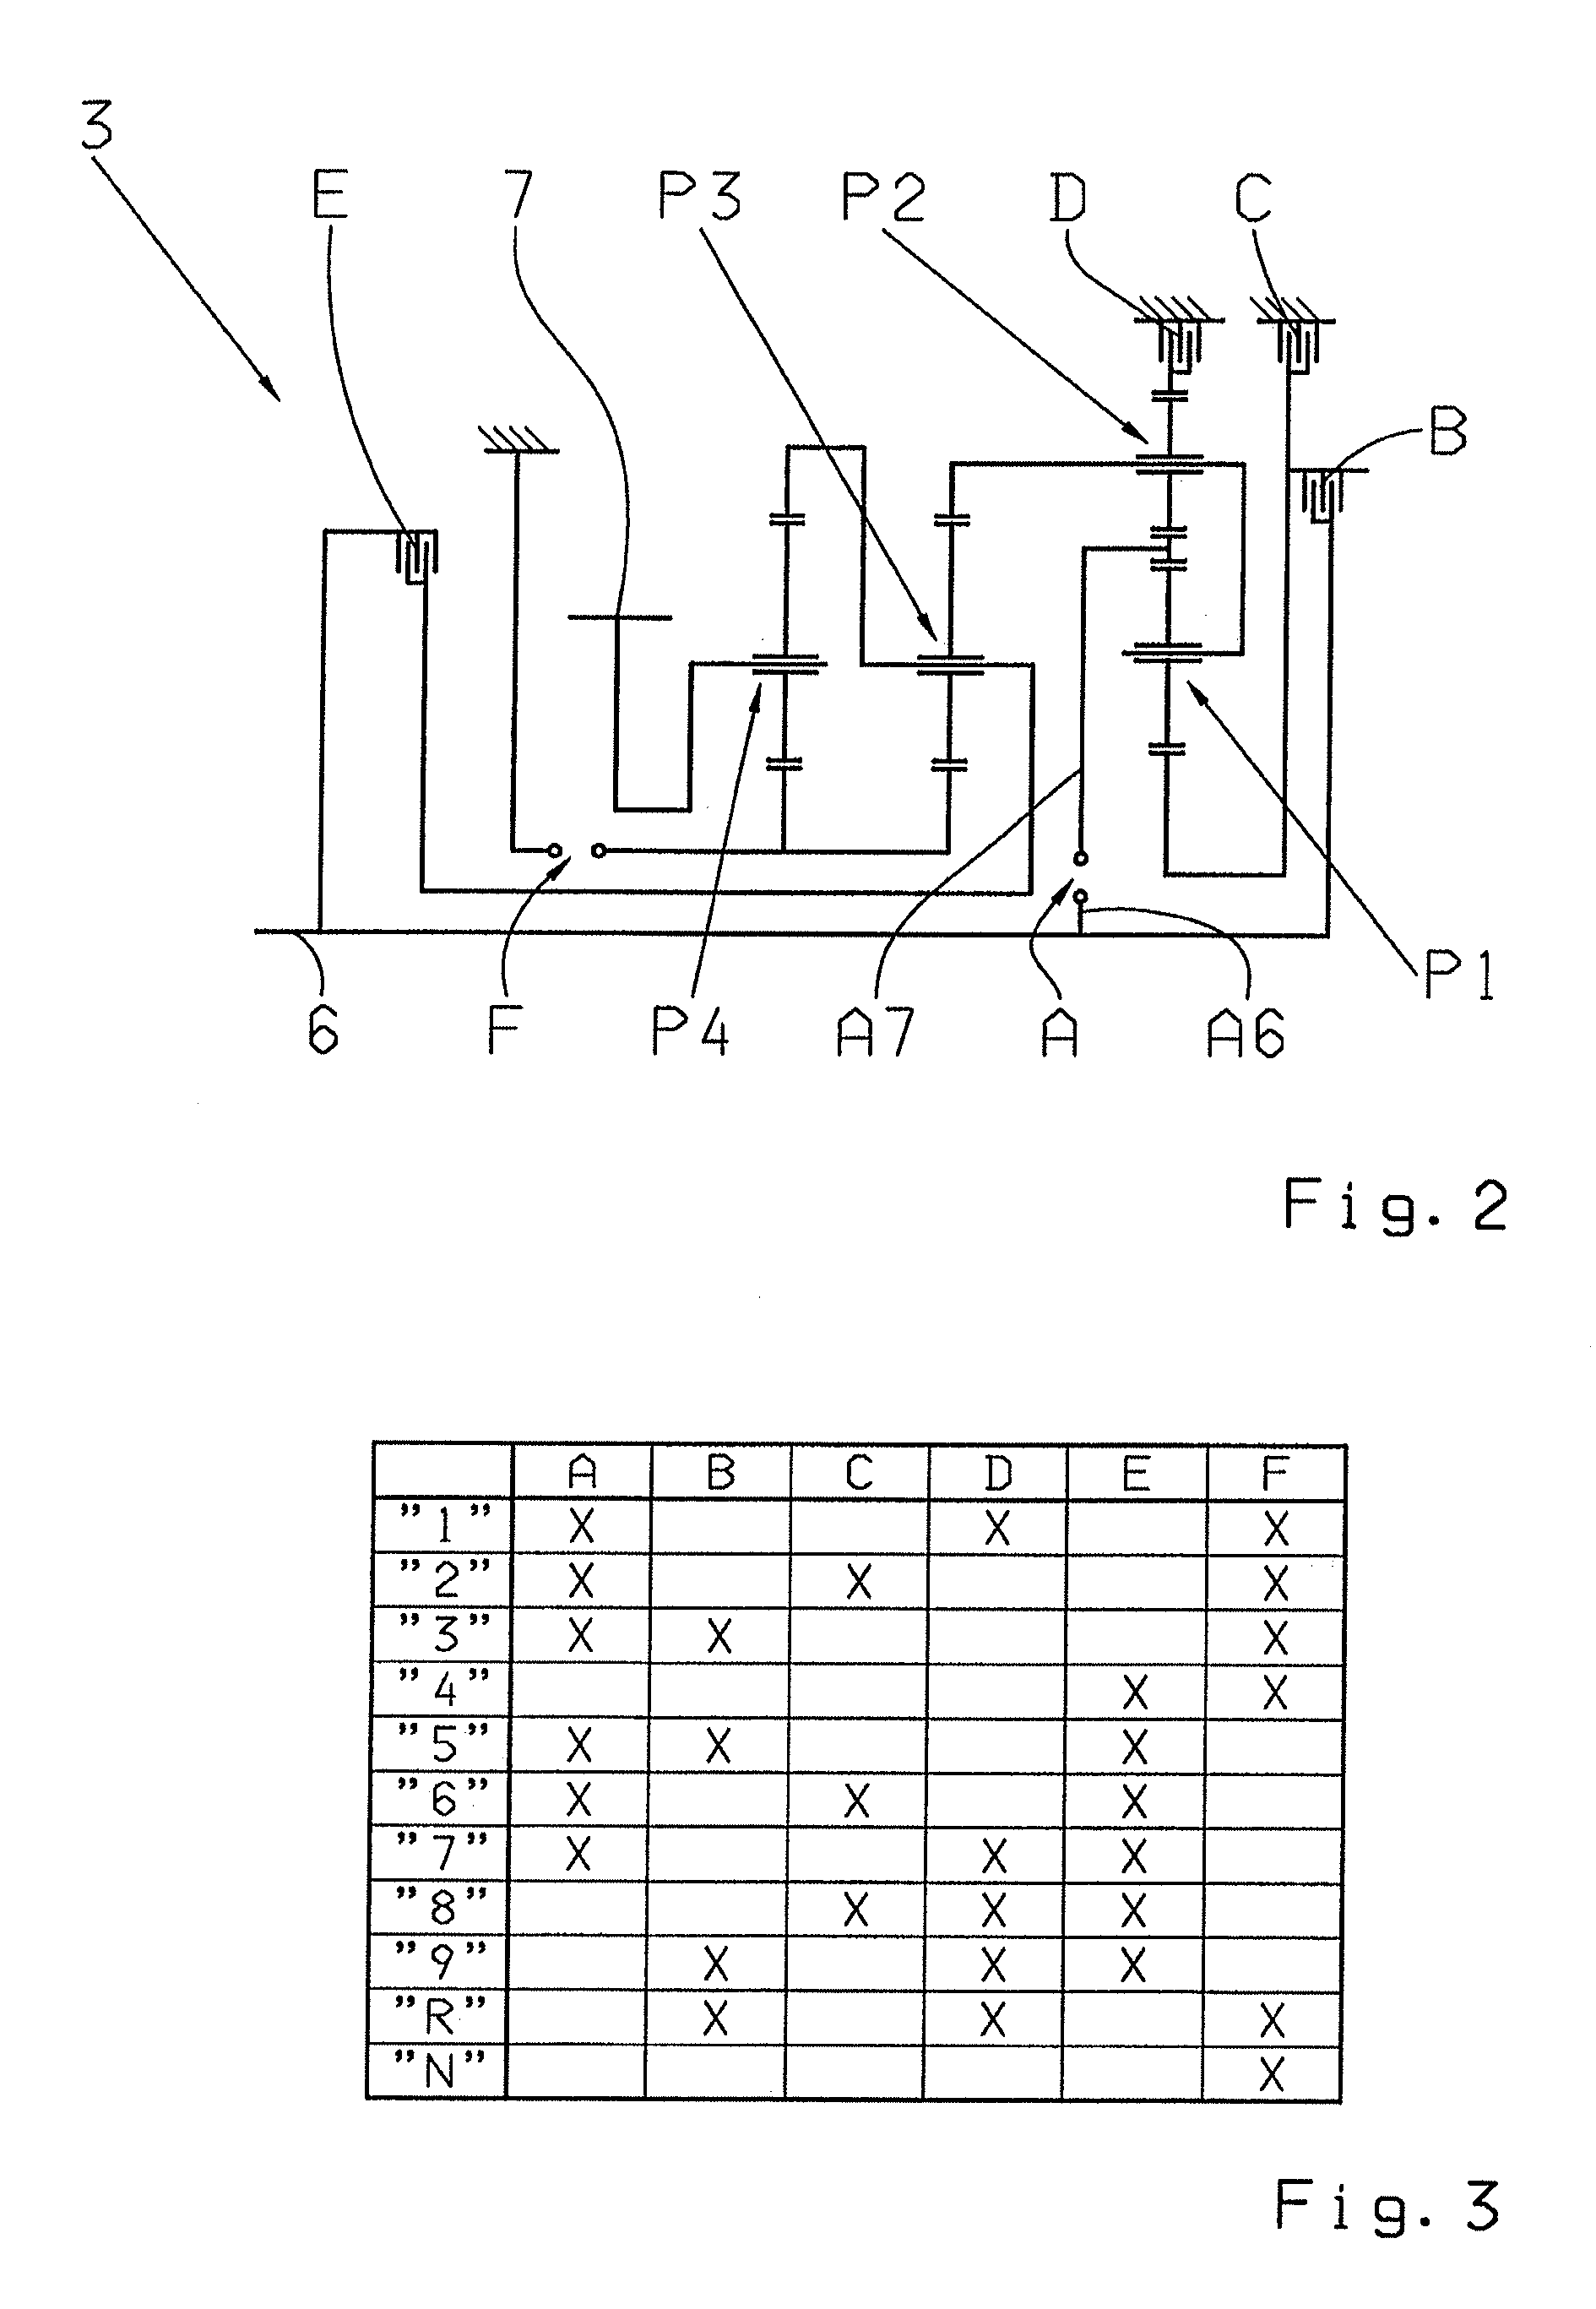 Method for operating a vehicle drive train having an internal combustion engine